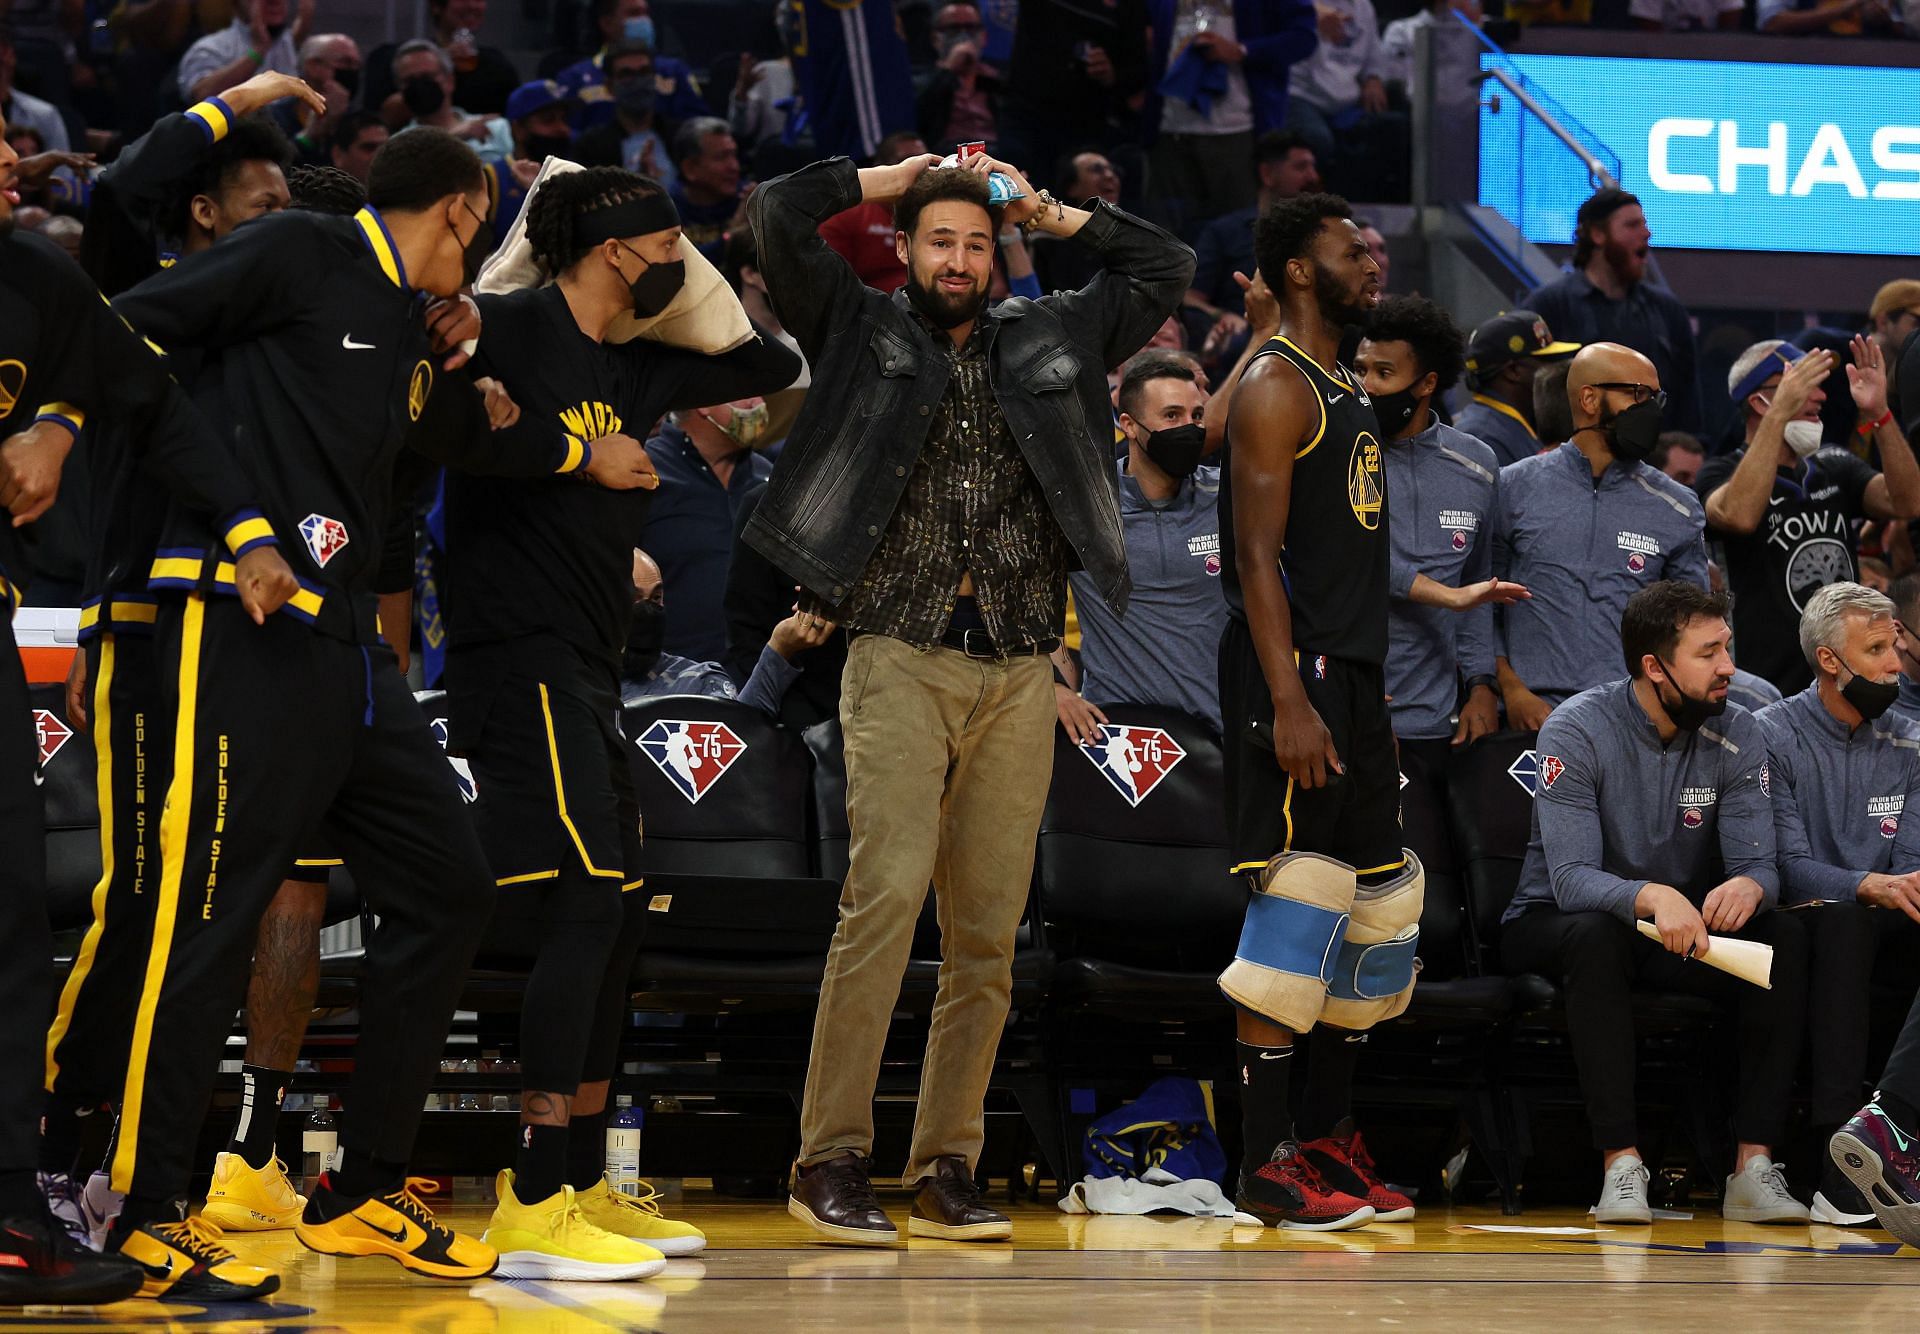 Thompson cheering on the Golden State Warriors from the sidelines